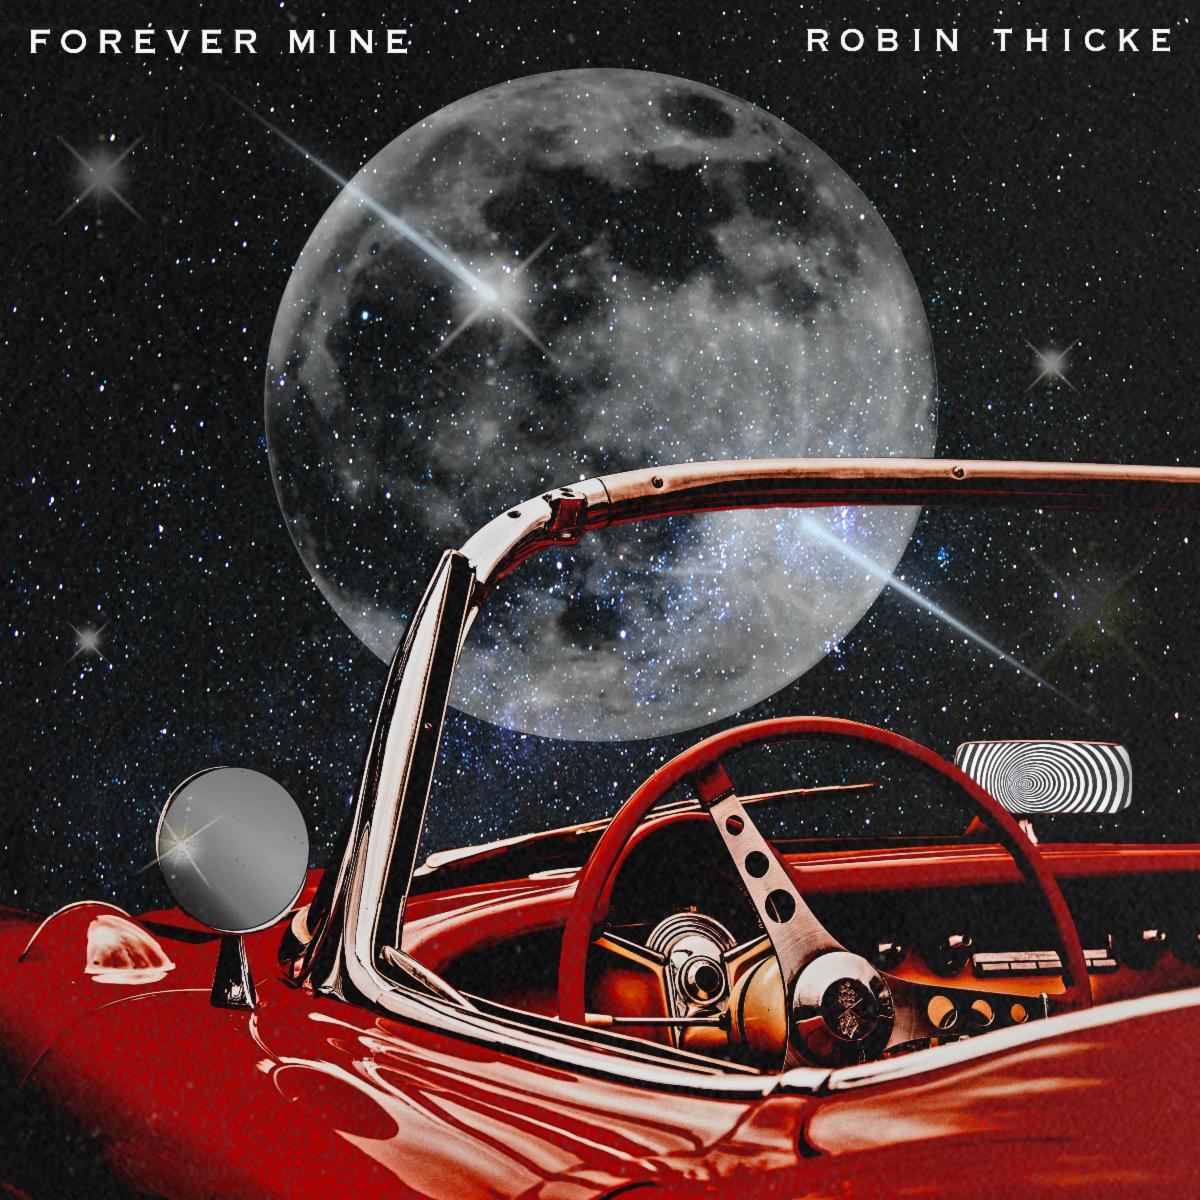 New Music: Robin Thicke - Forever Mine